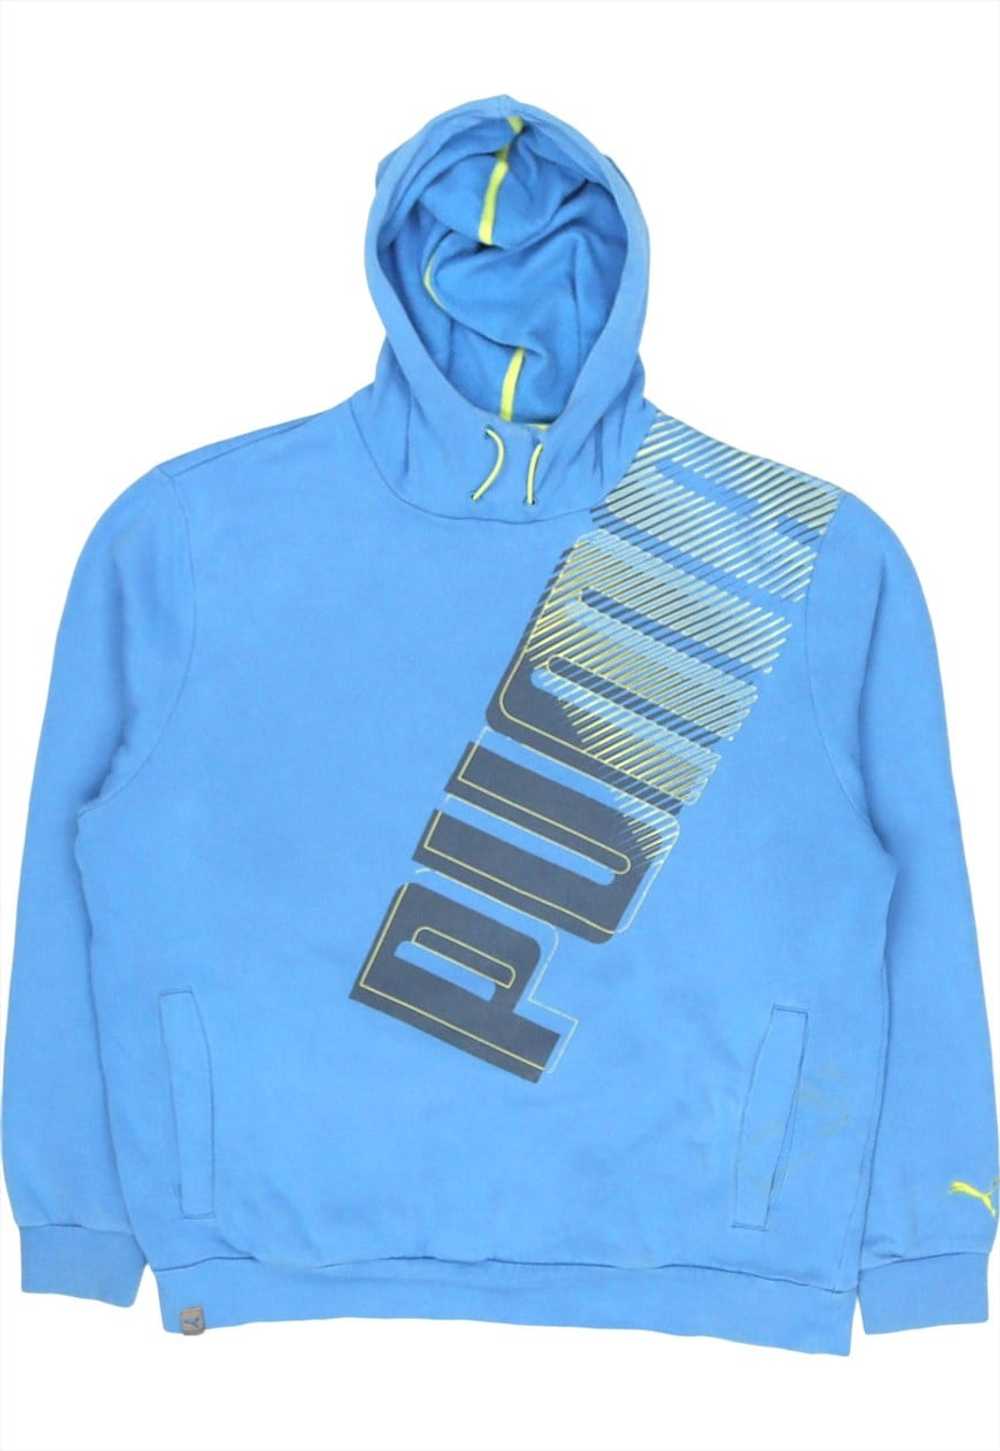 Vintage 90's Puma Hoodie Spellout Pullover - image 1